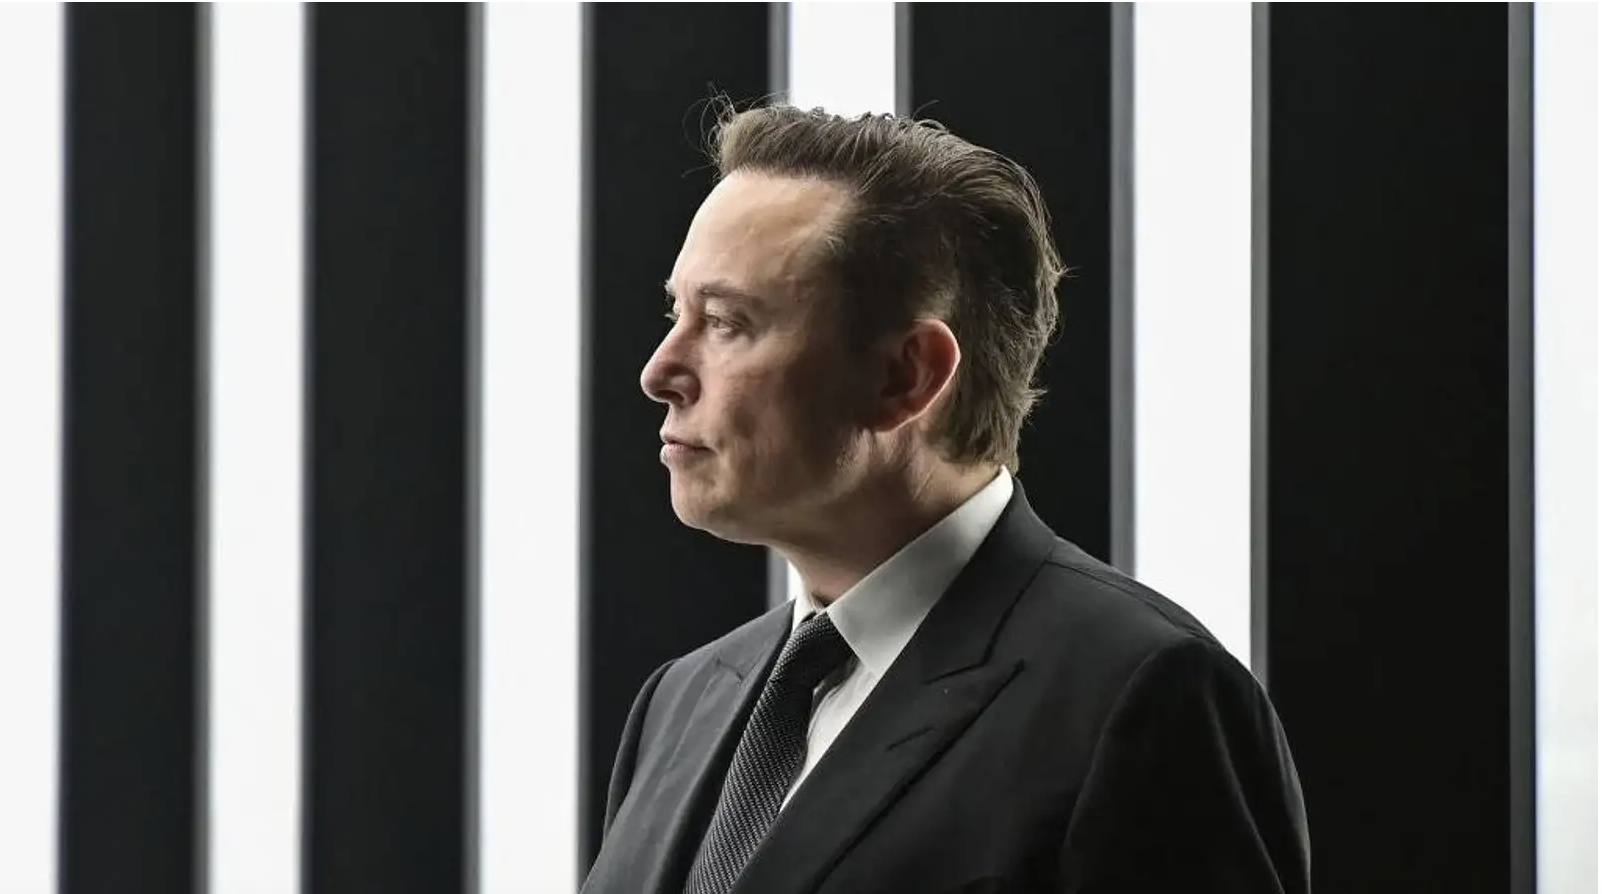 Musk, Tesla and SpaceX Had a Hell of a Year